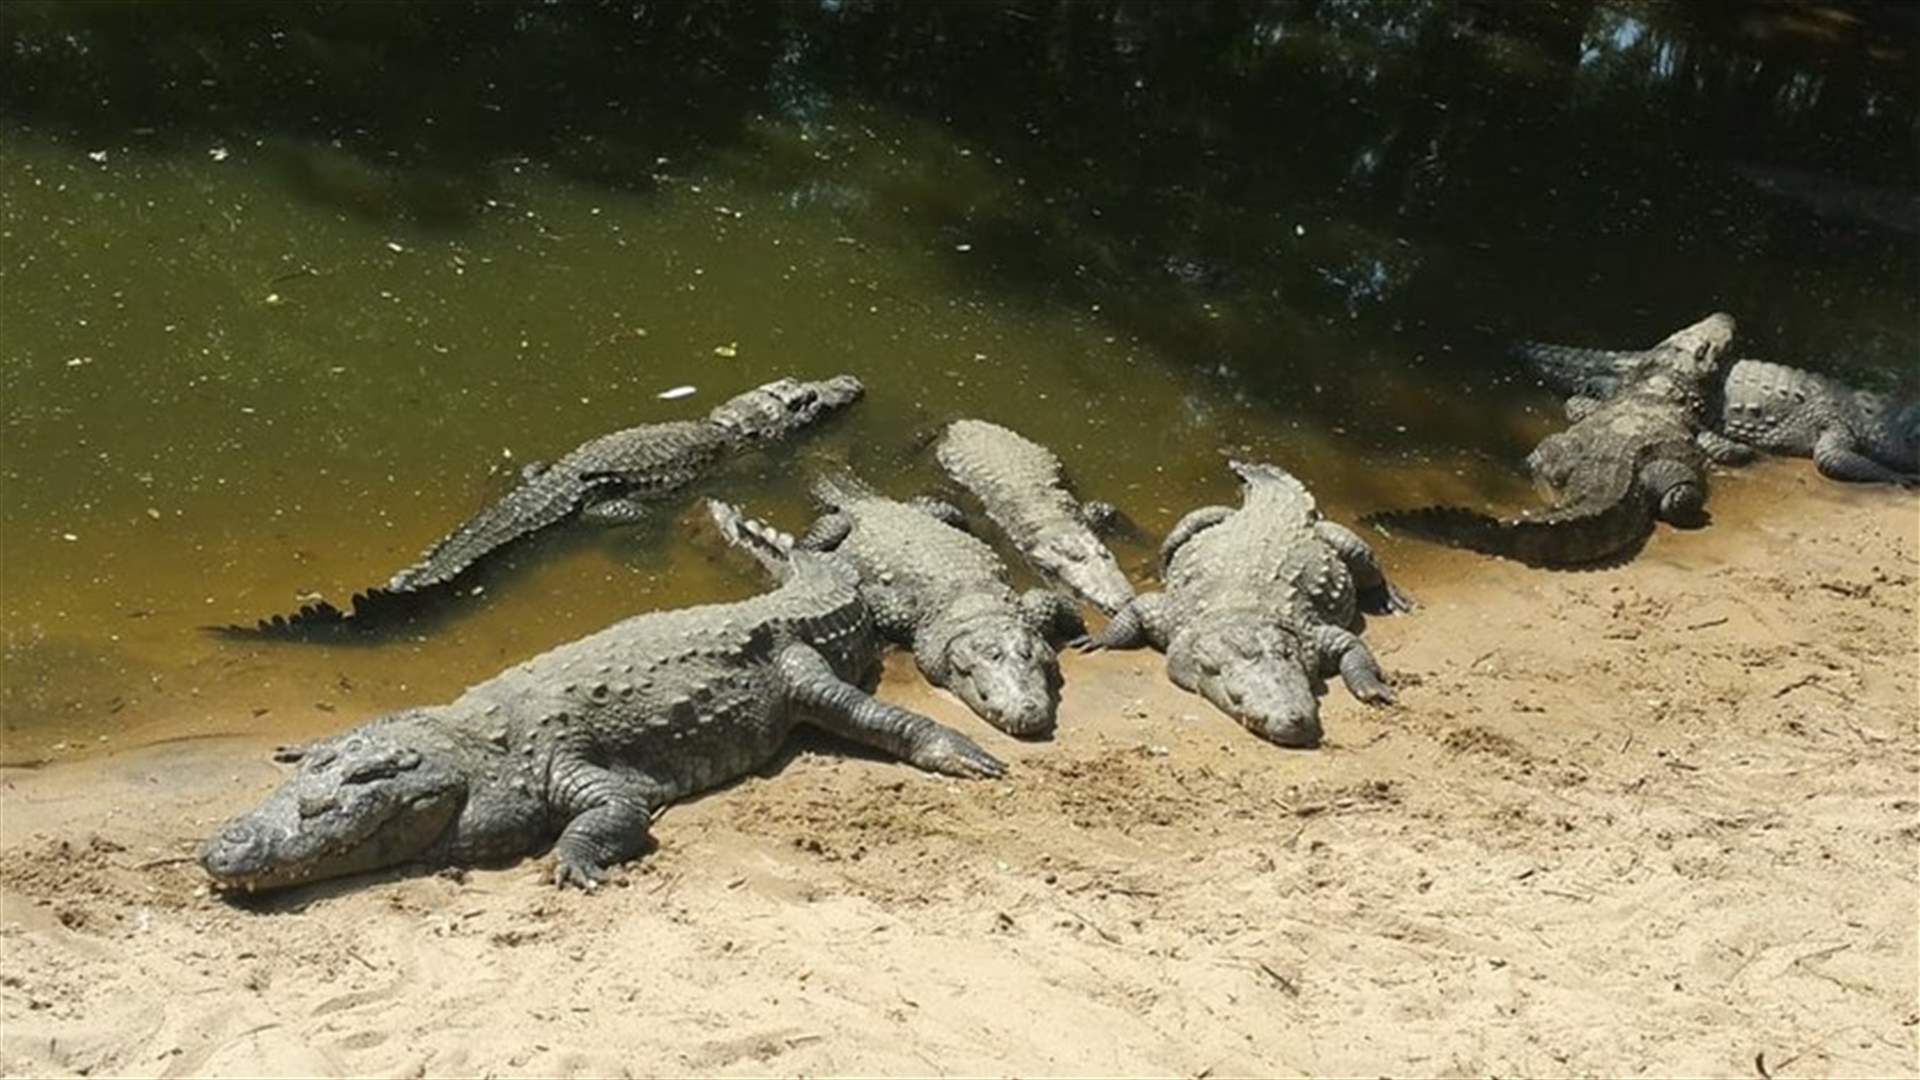 Australian Man Survives After Jumping Into Crocodile-Filled Water To Impress A Girl